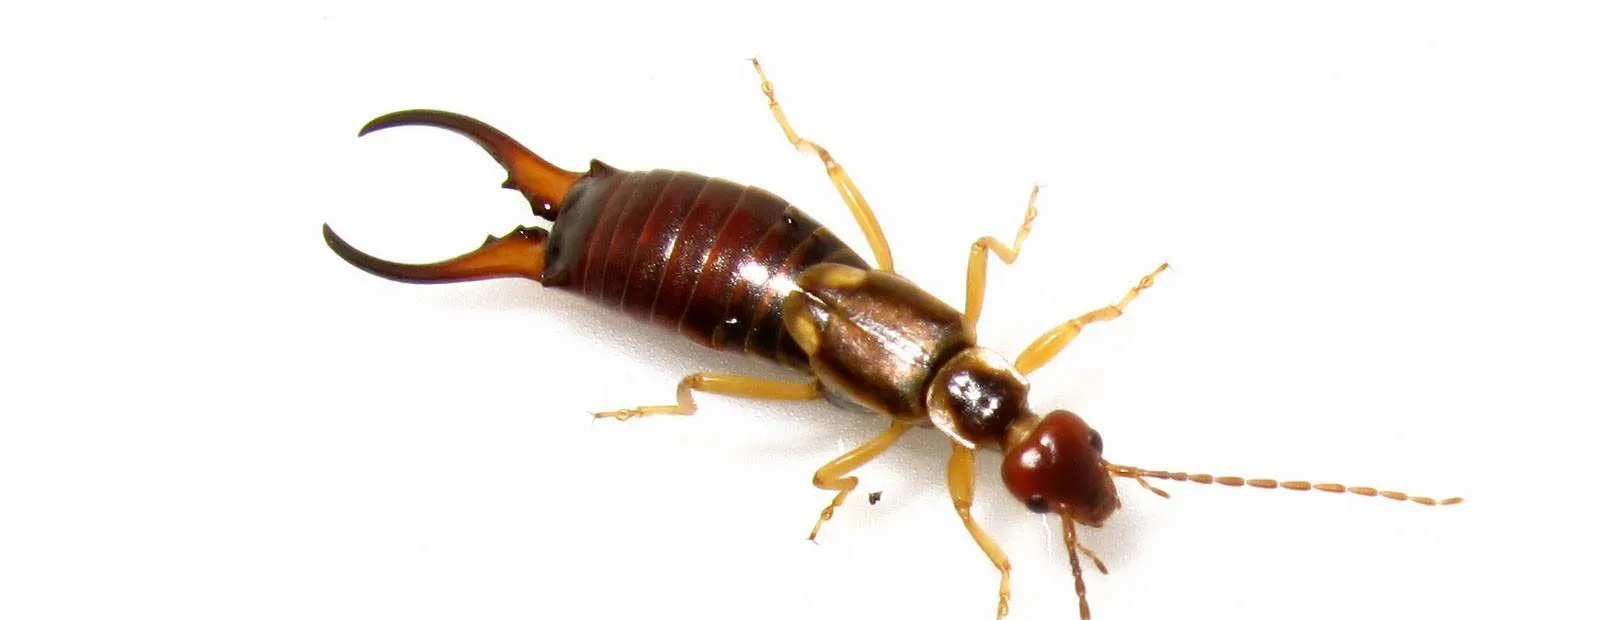 Earwig removal services in Toronto area by QAPC.